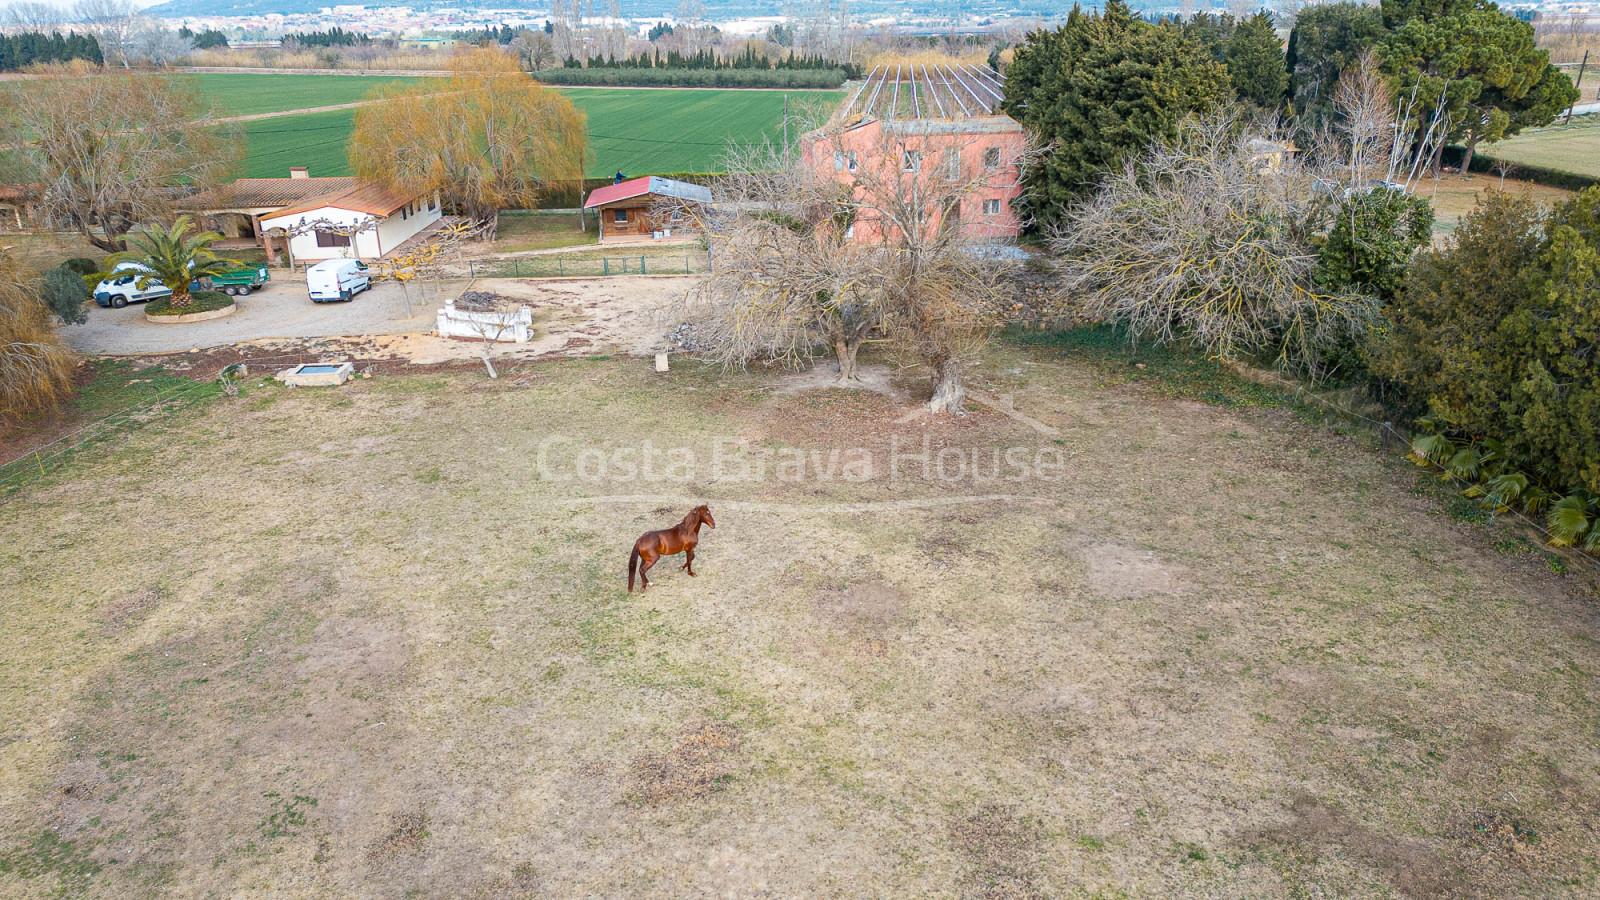 Equestrian property for sale in the area of Pals